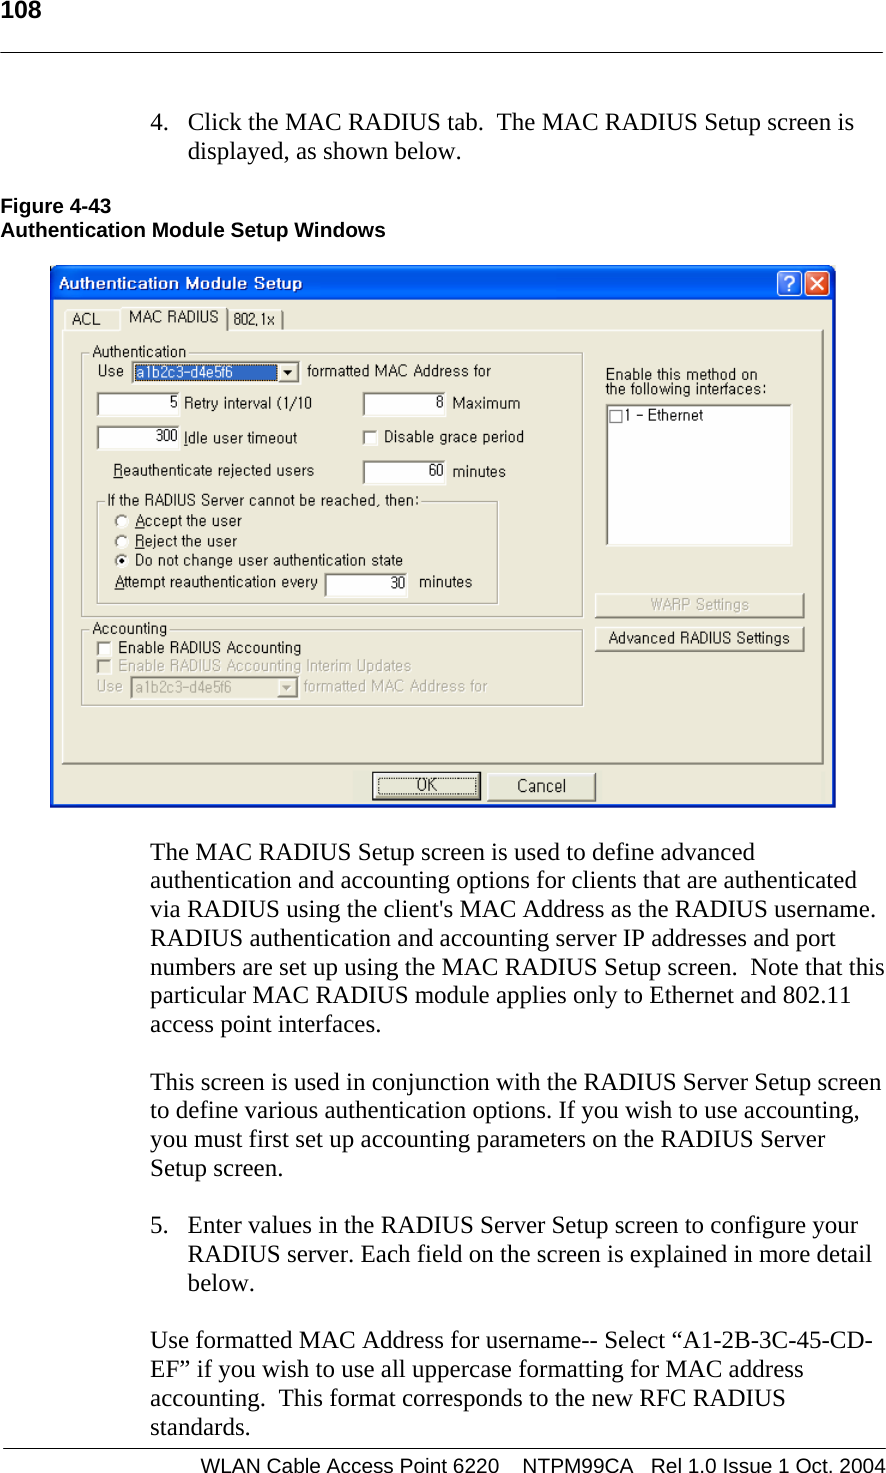   108   4. Click the MAC RADIUS tab.  The MAC RADIUS Setup screen is displayed, as shown below.  Figure 4-43 Authentication Module Setup Windows    The MAC RADIUS Setup screen is used to define advanced authentication and accounting options for clients that are authenticated via RADIUS using the client&apos;s MAC Address as the RADIUS username.  RADIUS authentication and accounting server IP addresses and port numbers are set up using the MAC RADIUS Setup screen.  Note that this particular MAC RADIUS module applies only to Ethernet and 802.11 access point interfaces.    This screen is used in conjunction with the RADIUS Server Setup screen to define various authentication options. If you wish to use accounting, you must first set up accounting parameters on the RADIUS Server Setup screen.    5. Enter values in the RADIUS Server Setup screen to configure your RADIUS server. Each field on the screen is explained in more detail below.  Use formatted MAC Address for username-- Select “A1-2B-3C-45-CD-EF” if you wish to use all uppercase formatting for MAC address accounting.  This format corresponds to the new RFC RADIUS standards.  WLAN Cable Access Point 6220    NTPM99CA   Rel 1.0 Issue 1 Oct. 2004